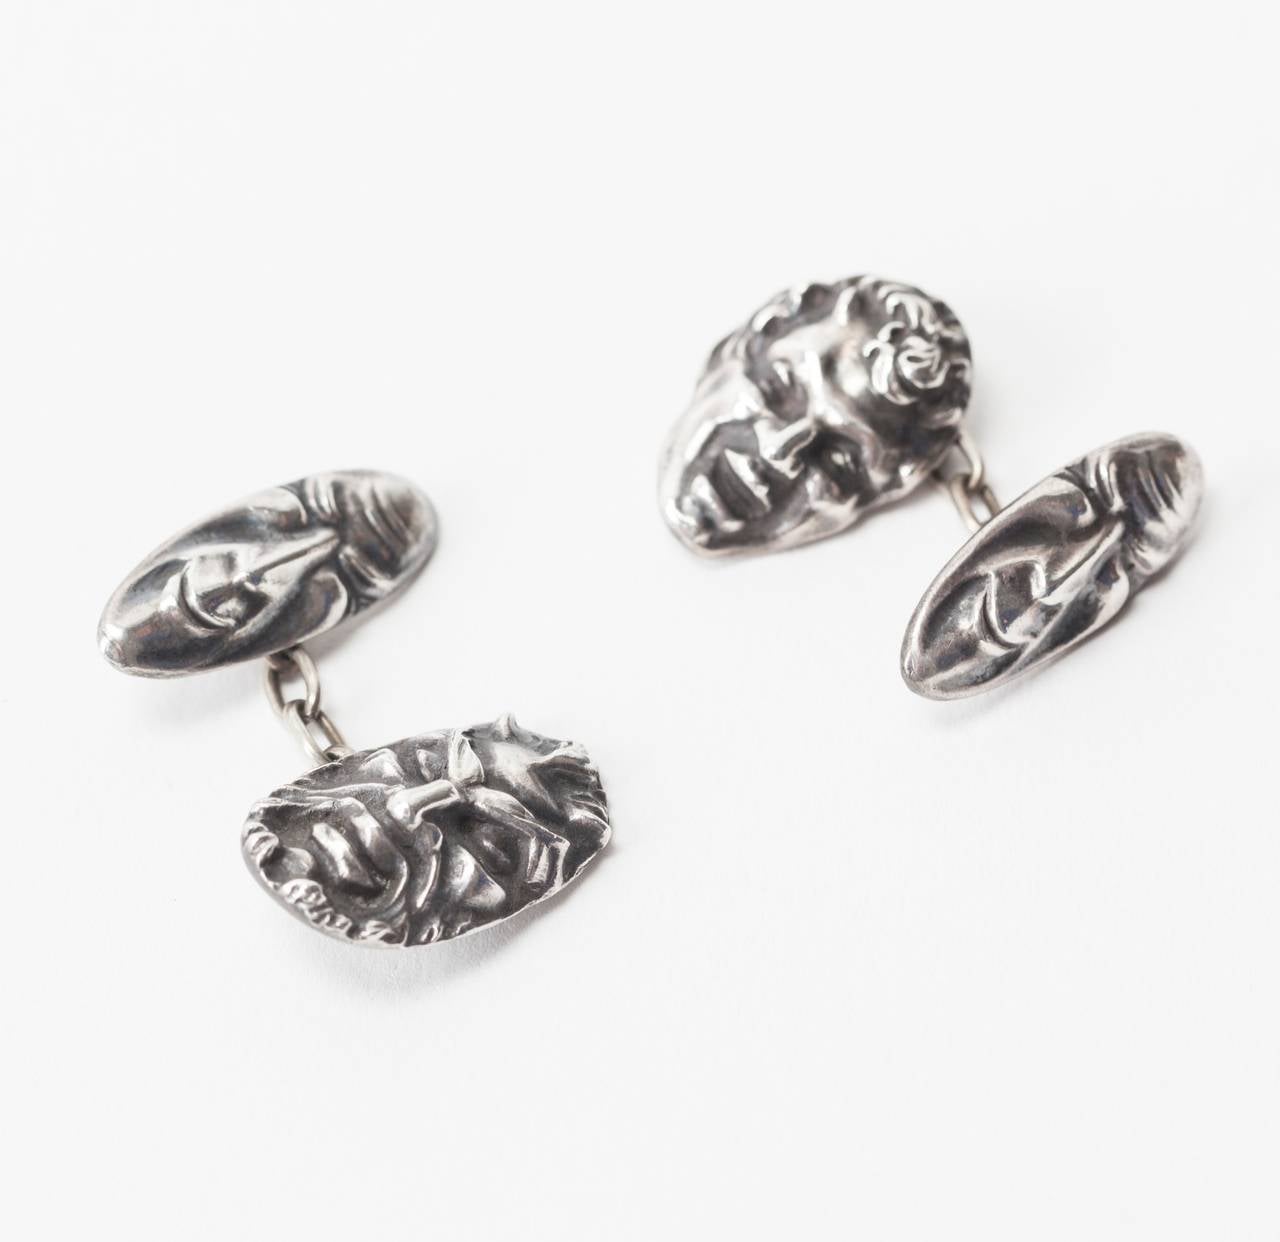 Grotesque mask cufflinks in heavy sterling silver by Etienne David. Little is known about Art Deco designer Etienne David, whose shop was on the Rue de la Paix in Paris in the 1920-30's ,although, he usually worked in the high Art Deco style.
These